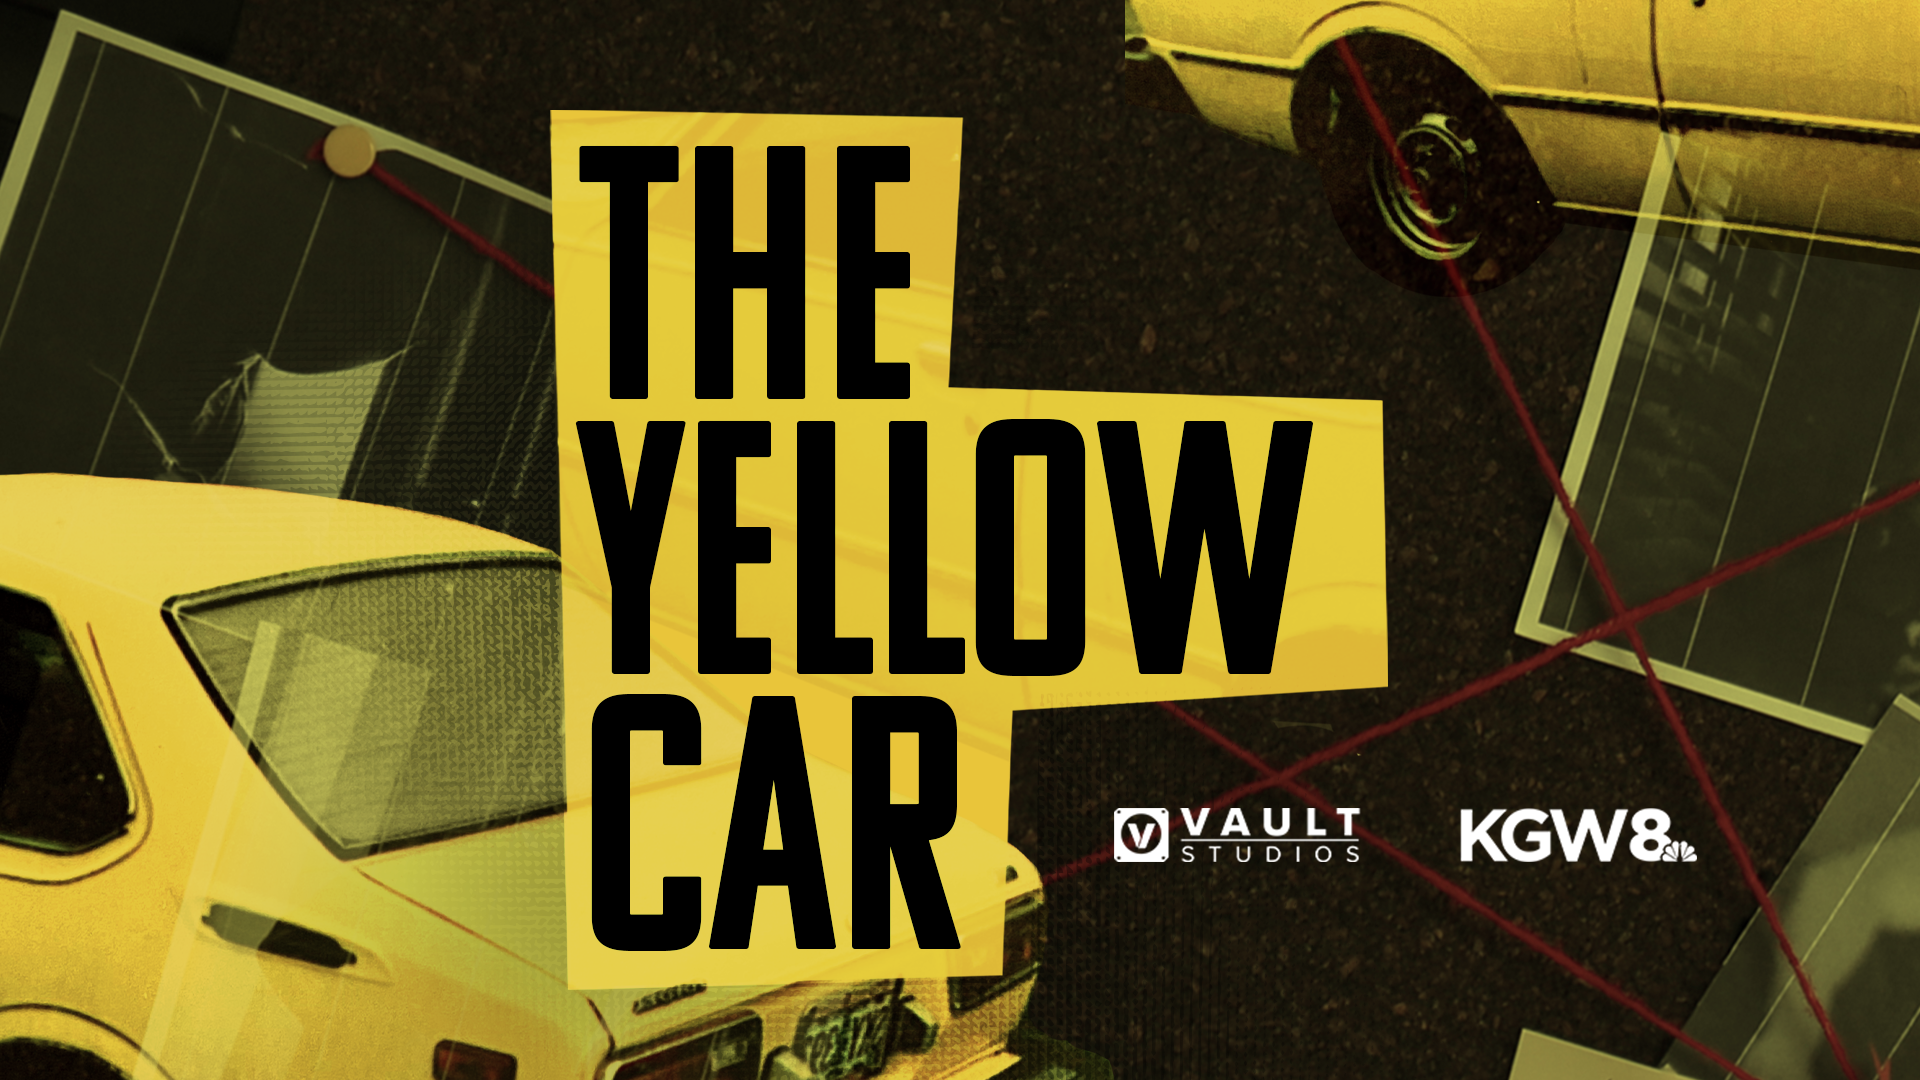 “The Yellow Car”, KGW’s new true-crime podcast, features a Vancouver woman who’s spent over three decades trying to find the person who killed her mother.